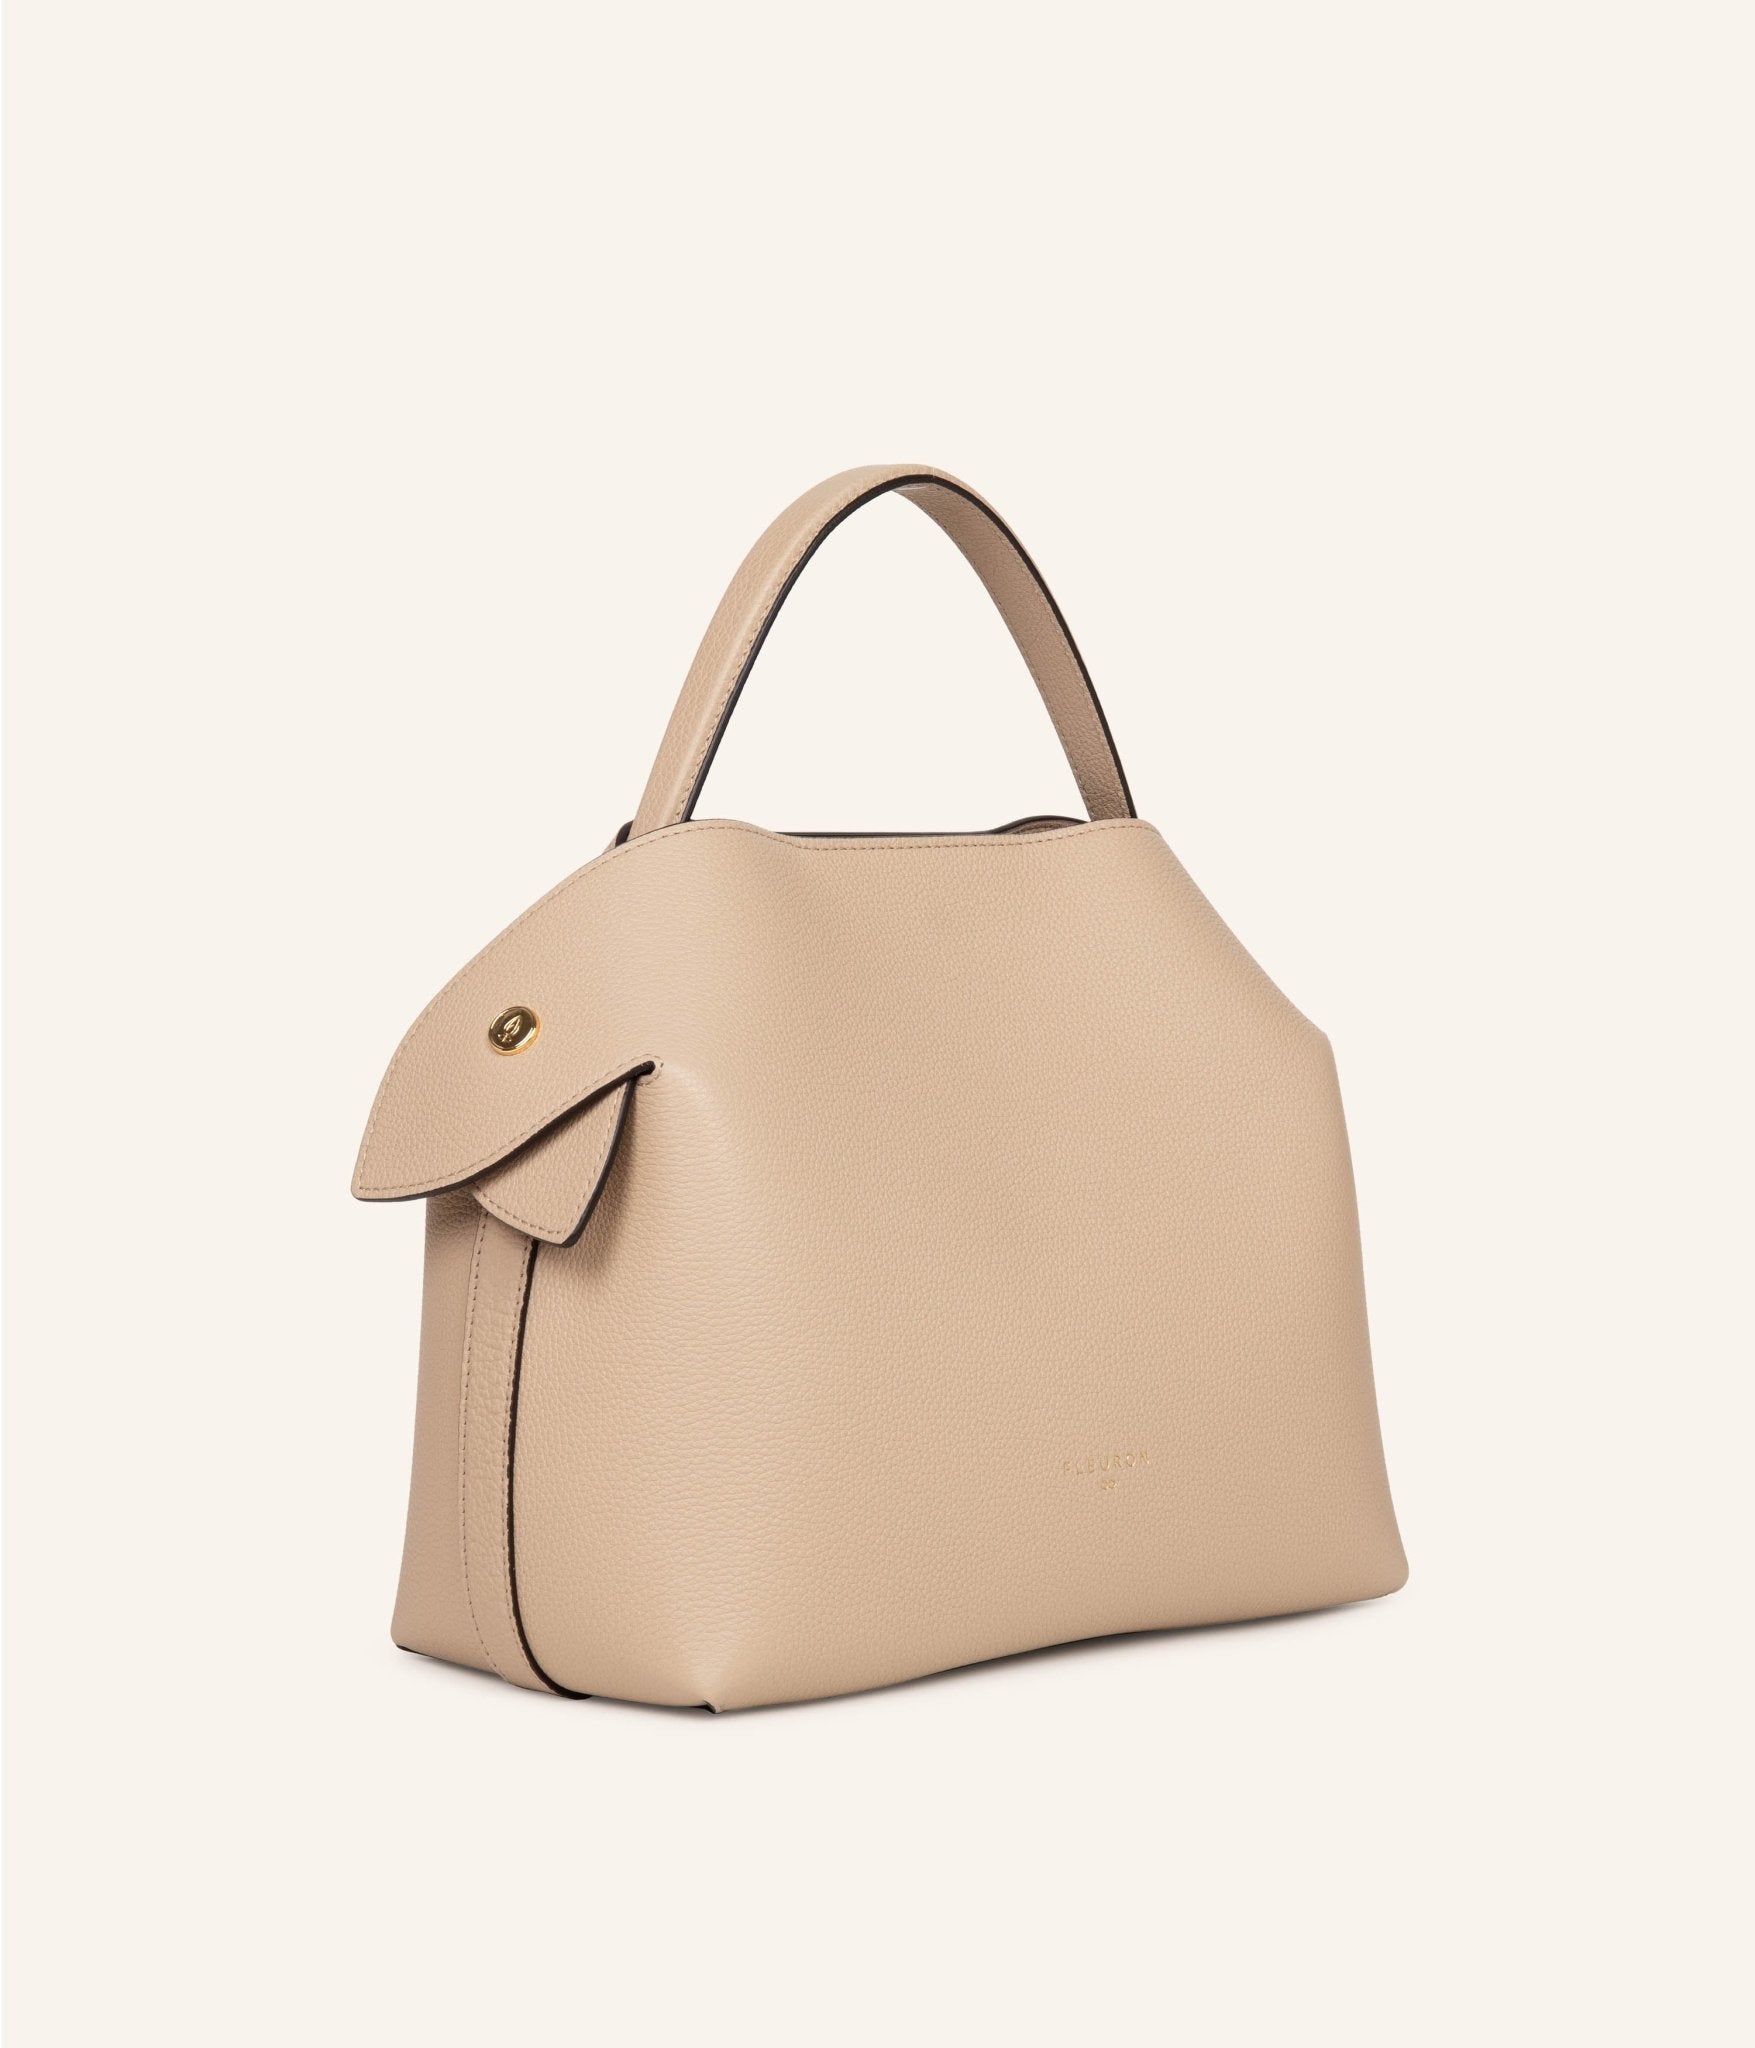 Does anyone have recs for sellers for the Hermes Picotin 18 in